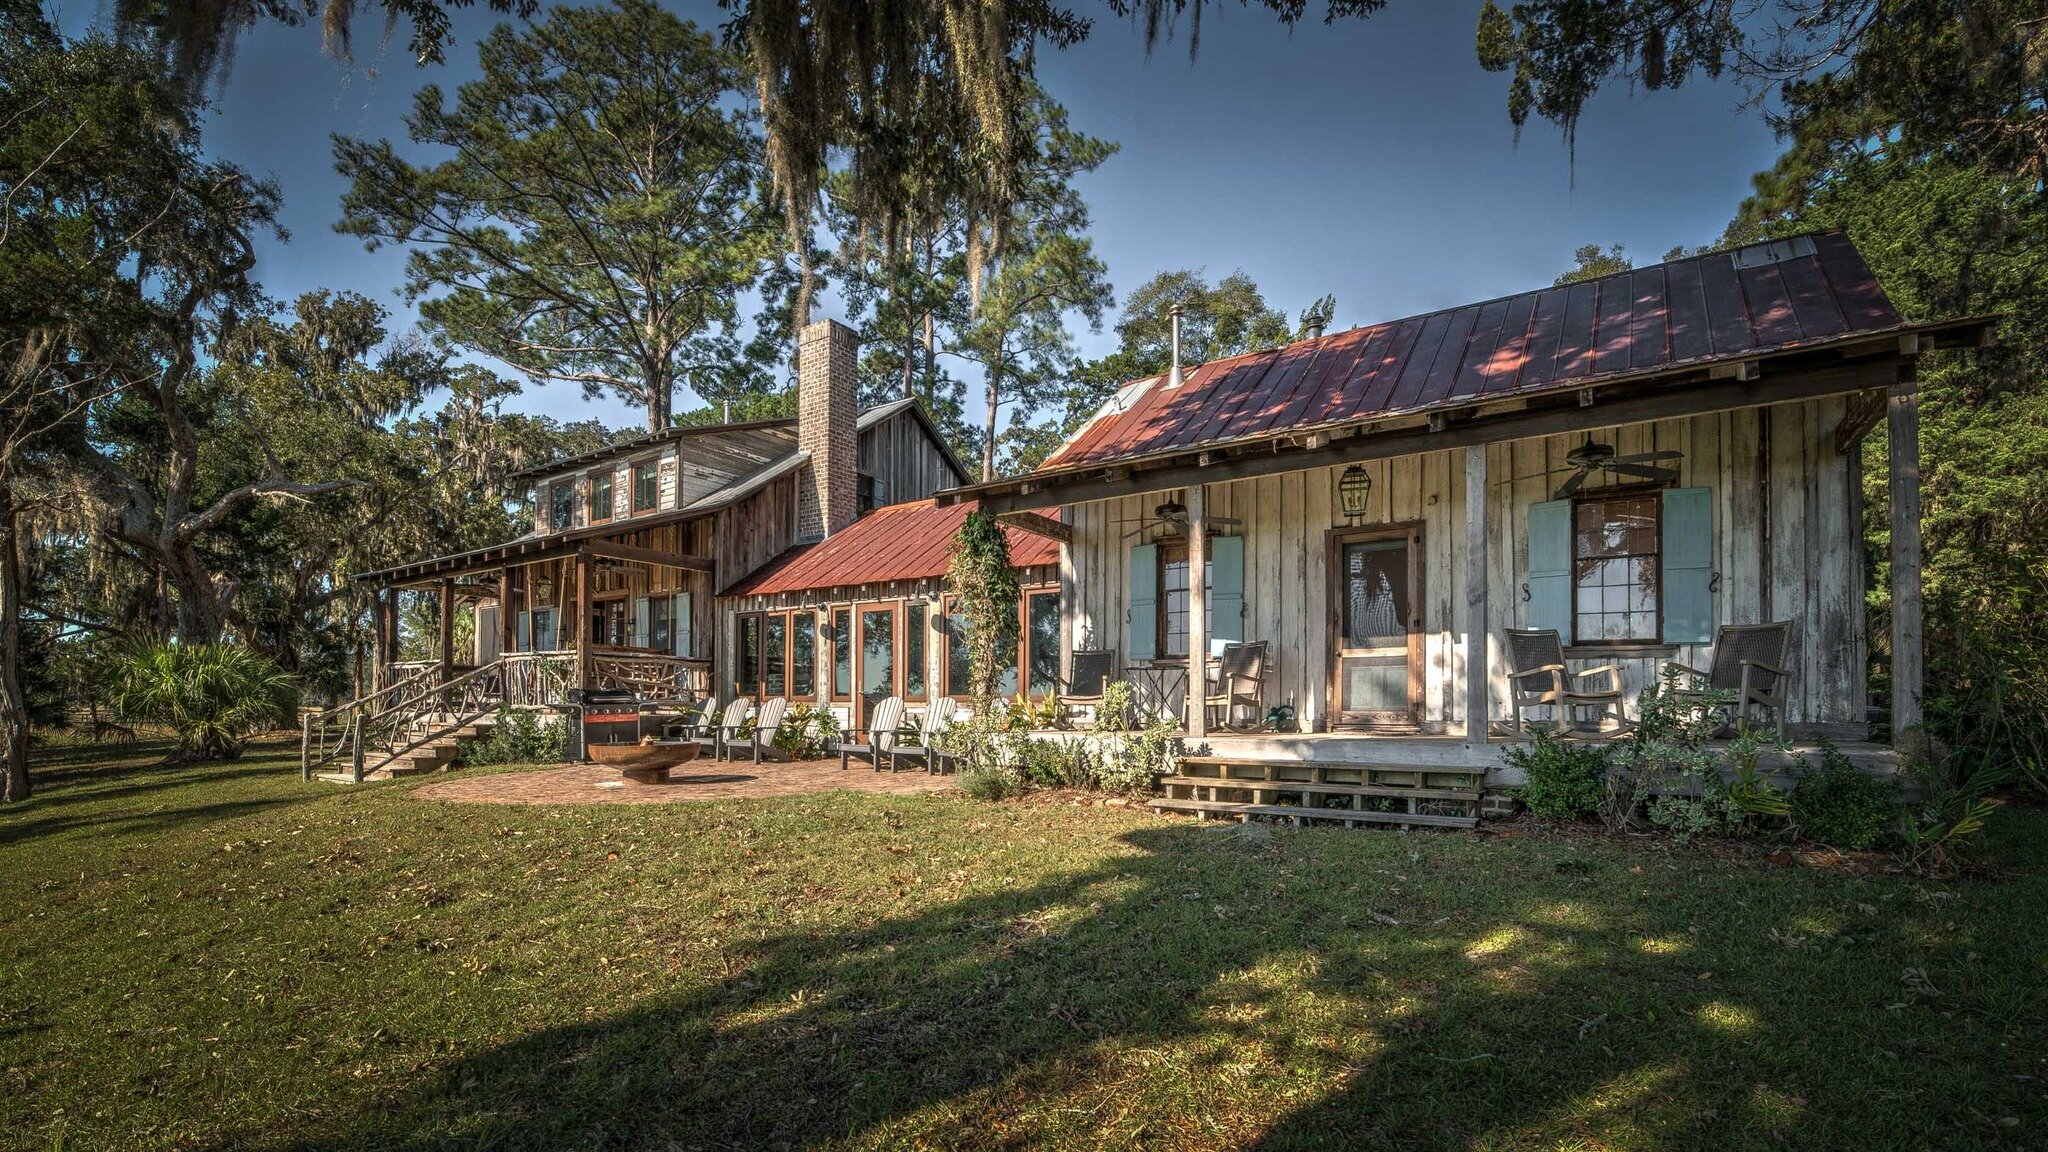 Planning a holiday trip with friends or family? We still have availability in December on the farm and on Sapelo Island! 

Visit our website today to plan your getaway on the coast of Georgia. 

#christmastrip #familytrip #familyholiday #airbnb #vrbo